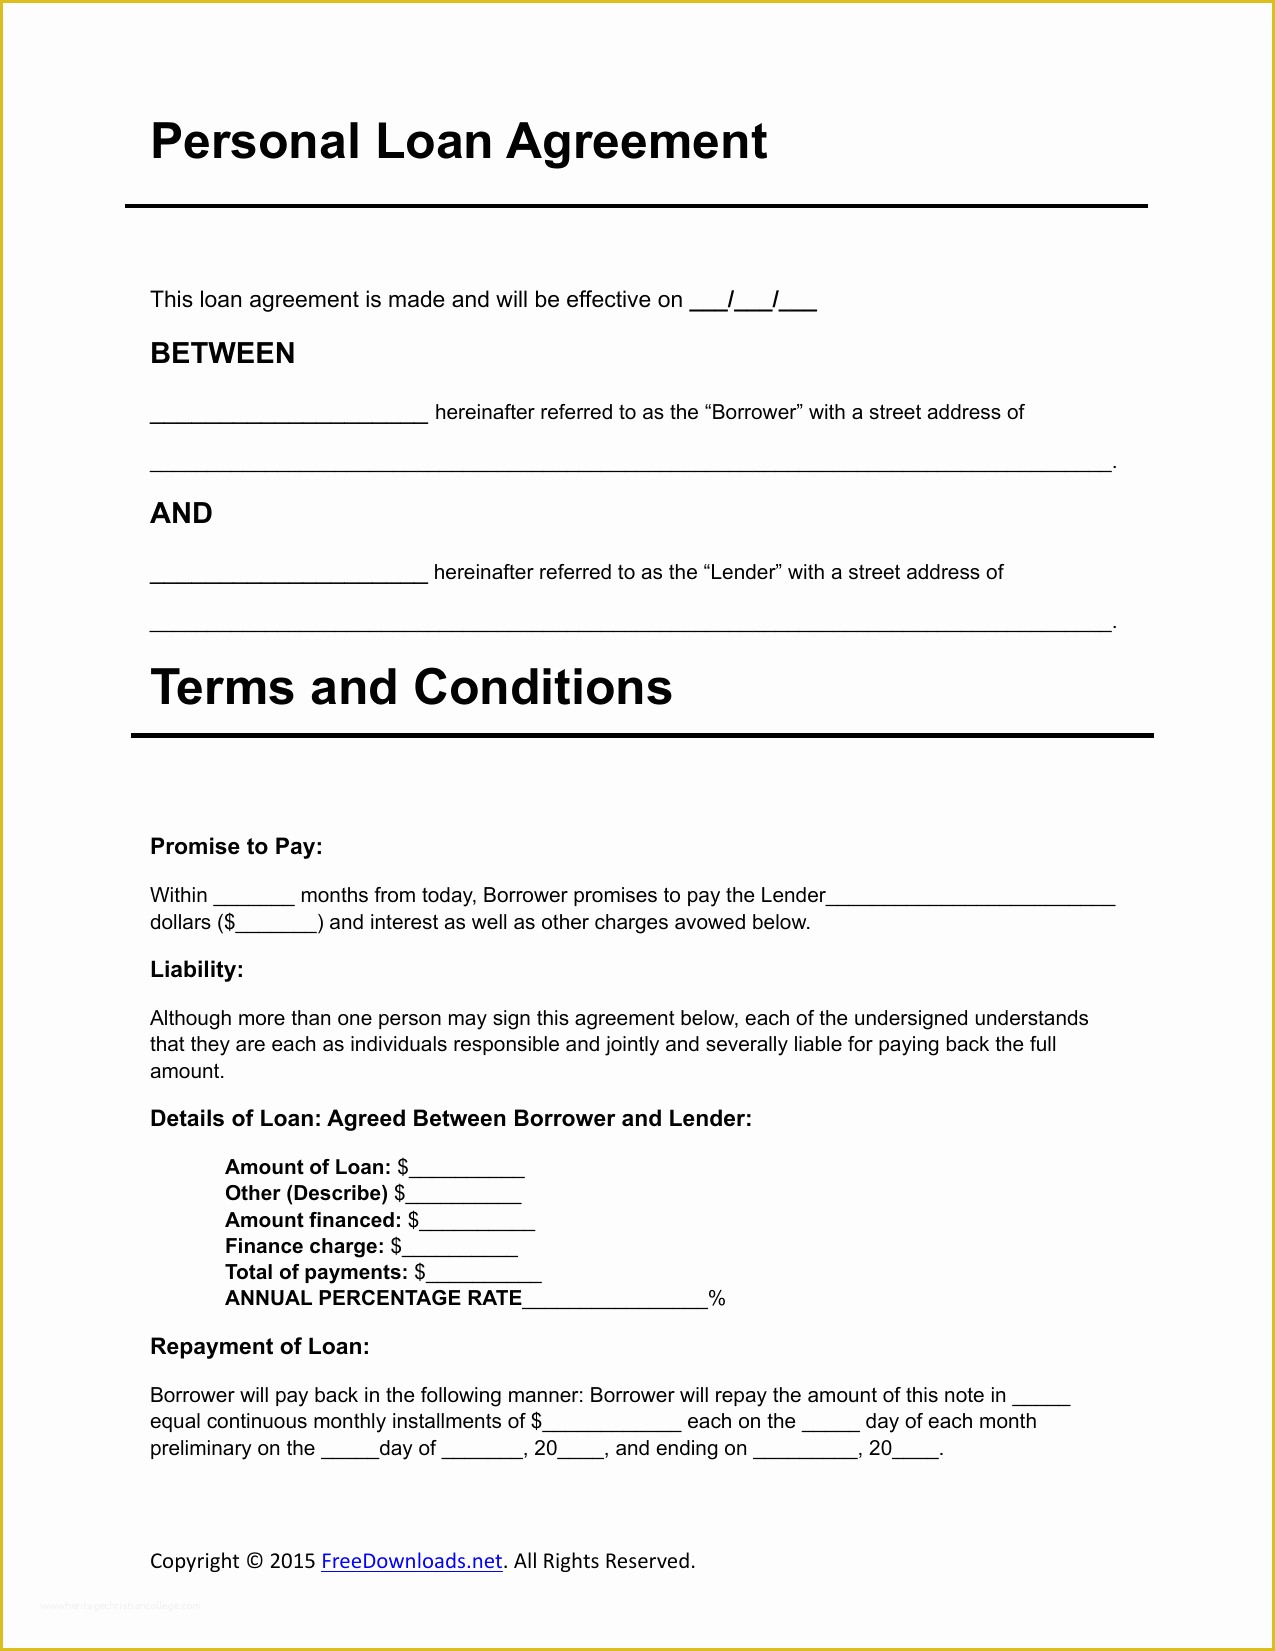 Loan Repayment Contract Free Template Of Download Personal Loan Agreement Template Pdf